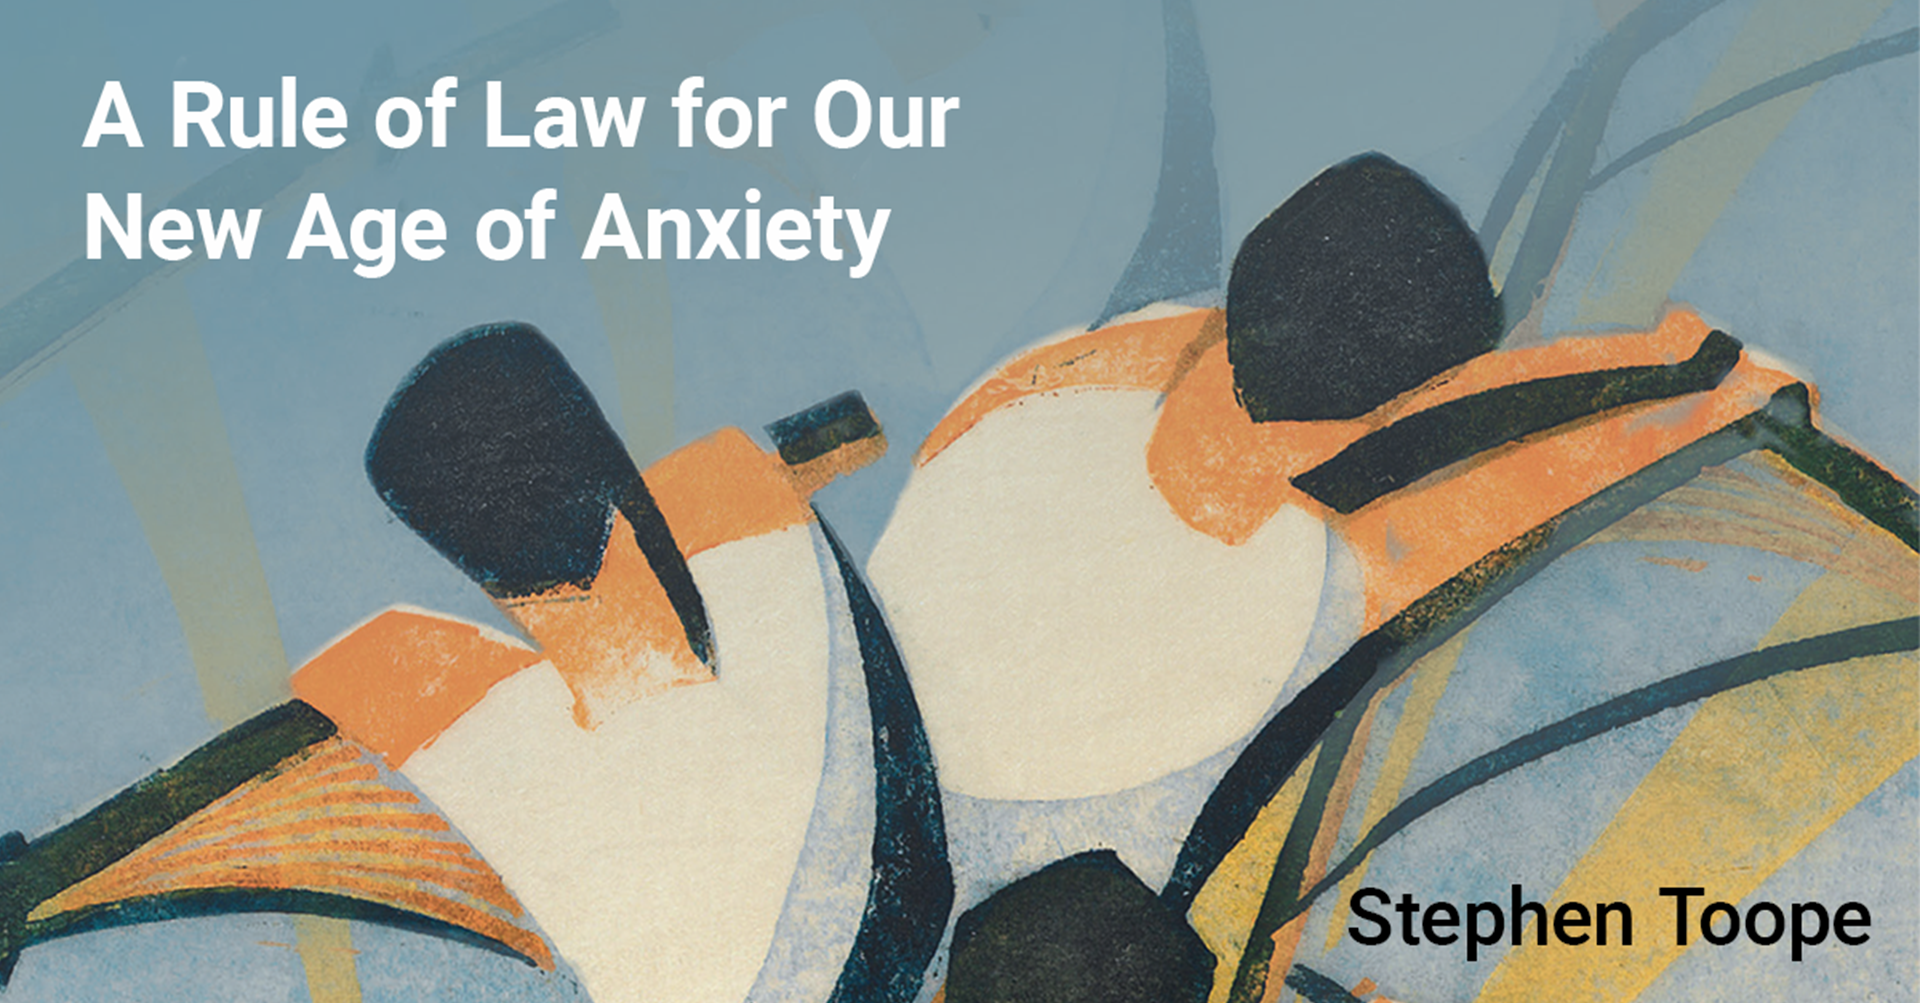 Book cover design of A Rule of Law for Our New Age of Anxiety